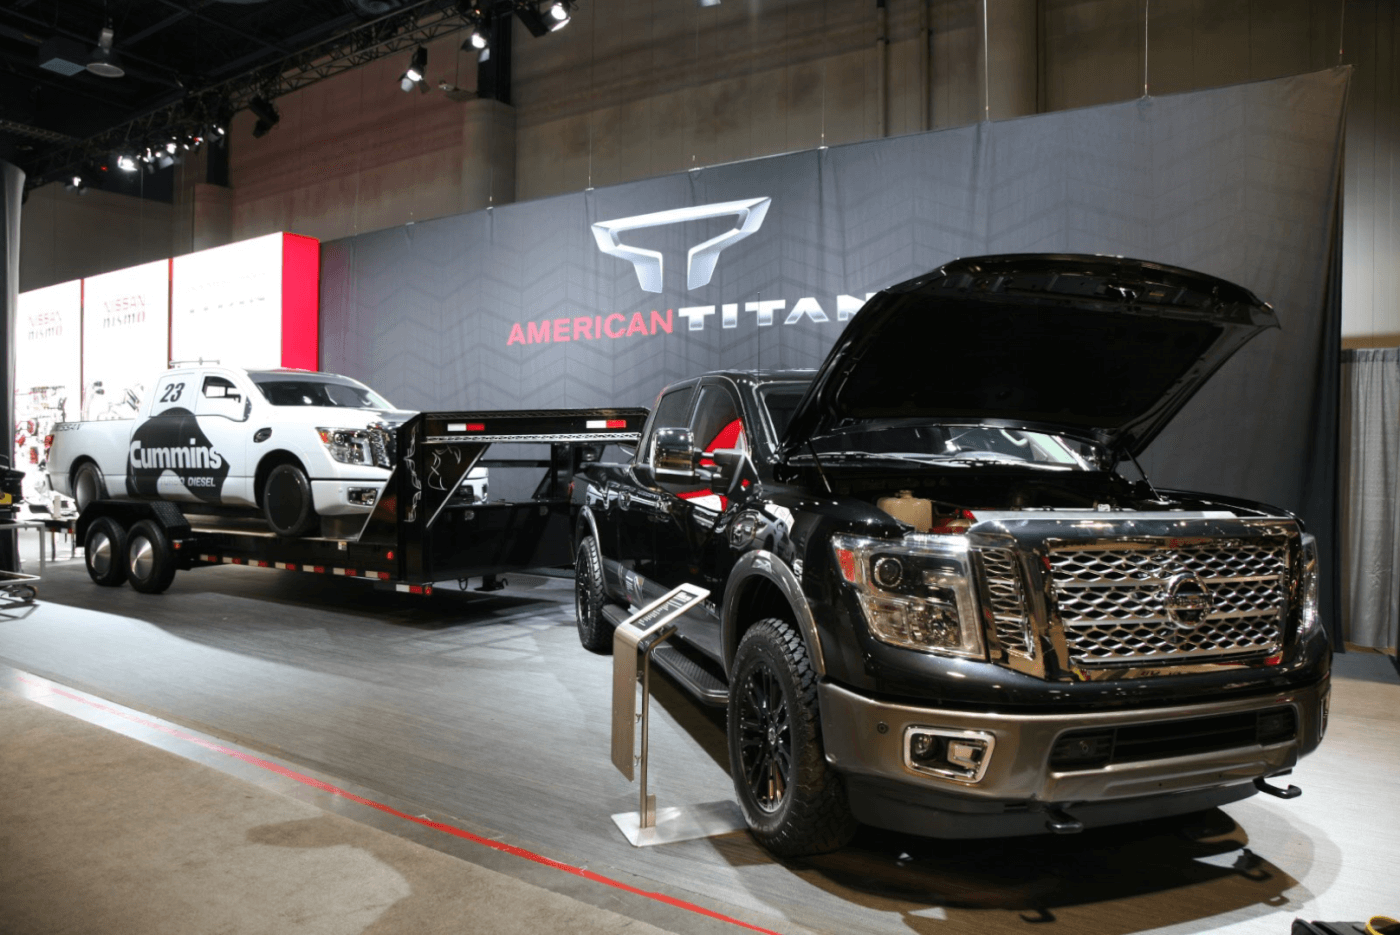 With the release of the new Cummins powered Nissan Titan, Nissan has decided to go after a new land-speed record with this truck dubbed “Triple Nickle.” The 5.0L Cummins will be looking to best the current record in its class of 191 mph with the engines rated 555lb-ft. torque rating (hence the name, “Triple Nickle”).